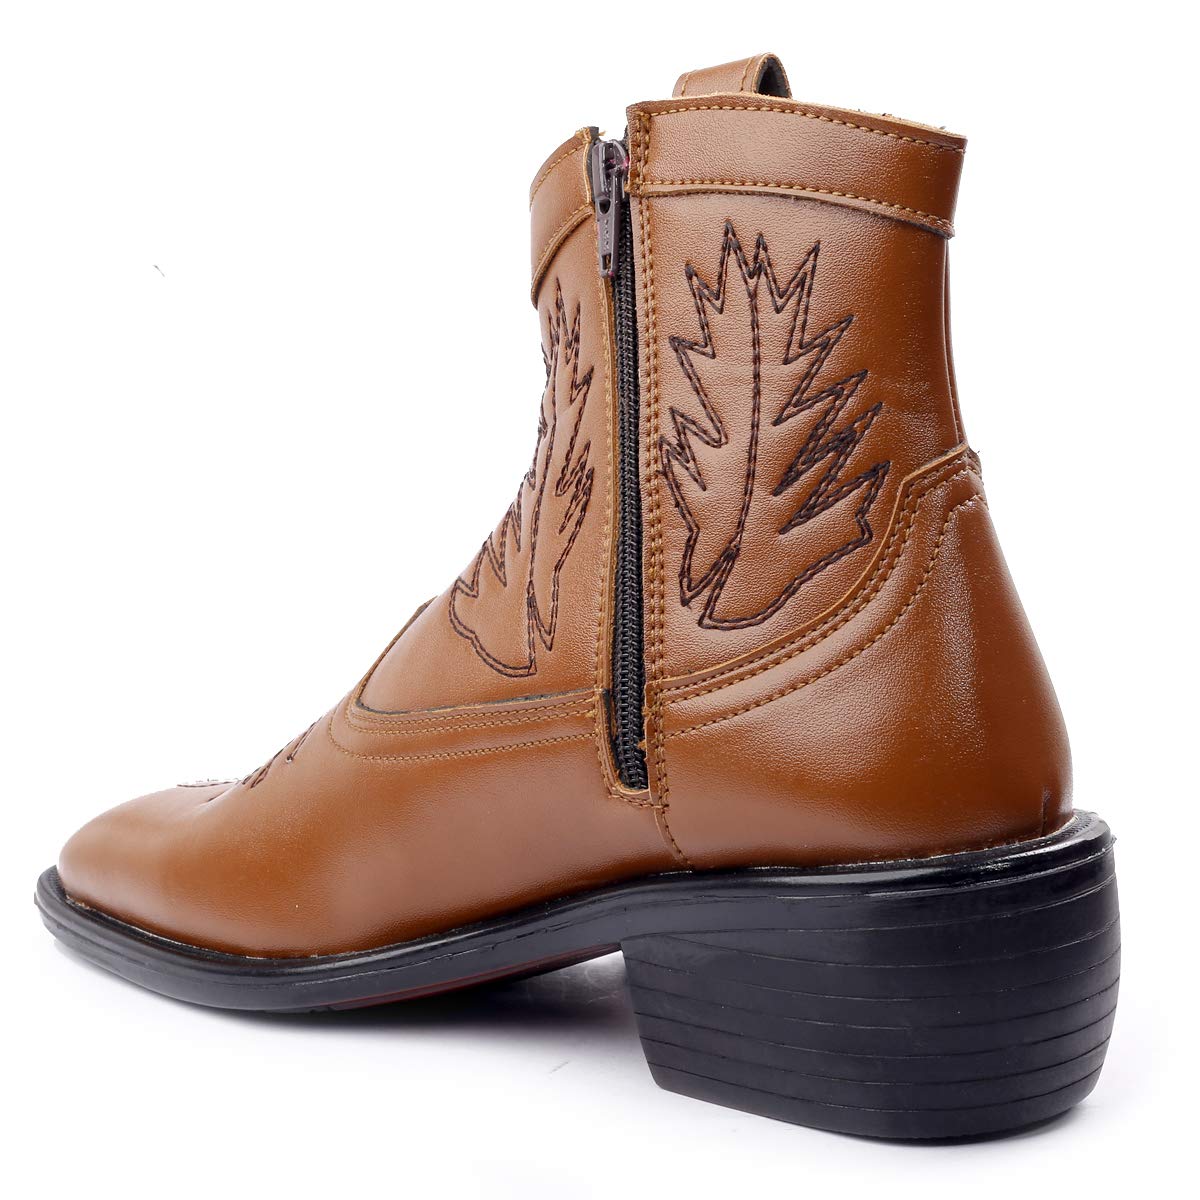 Stylish High Ankle Tan Casual And Formal Boot With Leaf Pattern-Unique and Classy